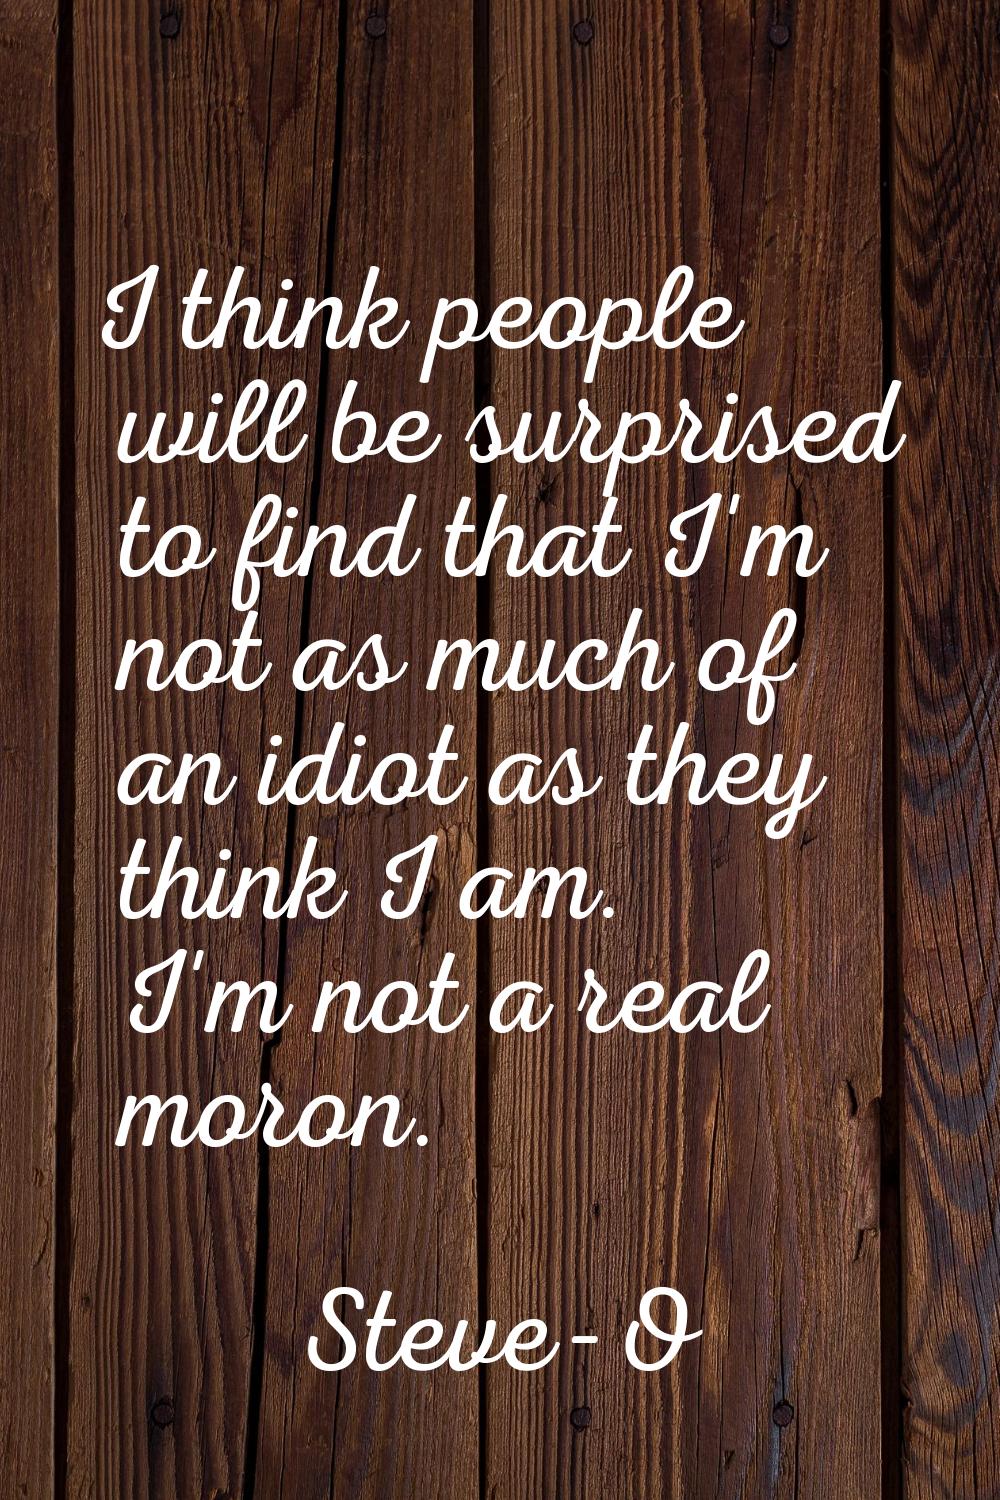 I think people will be surprised to find that I'm not as much of an idiot as they think I am. I'm n